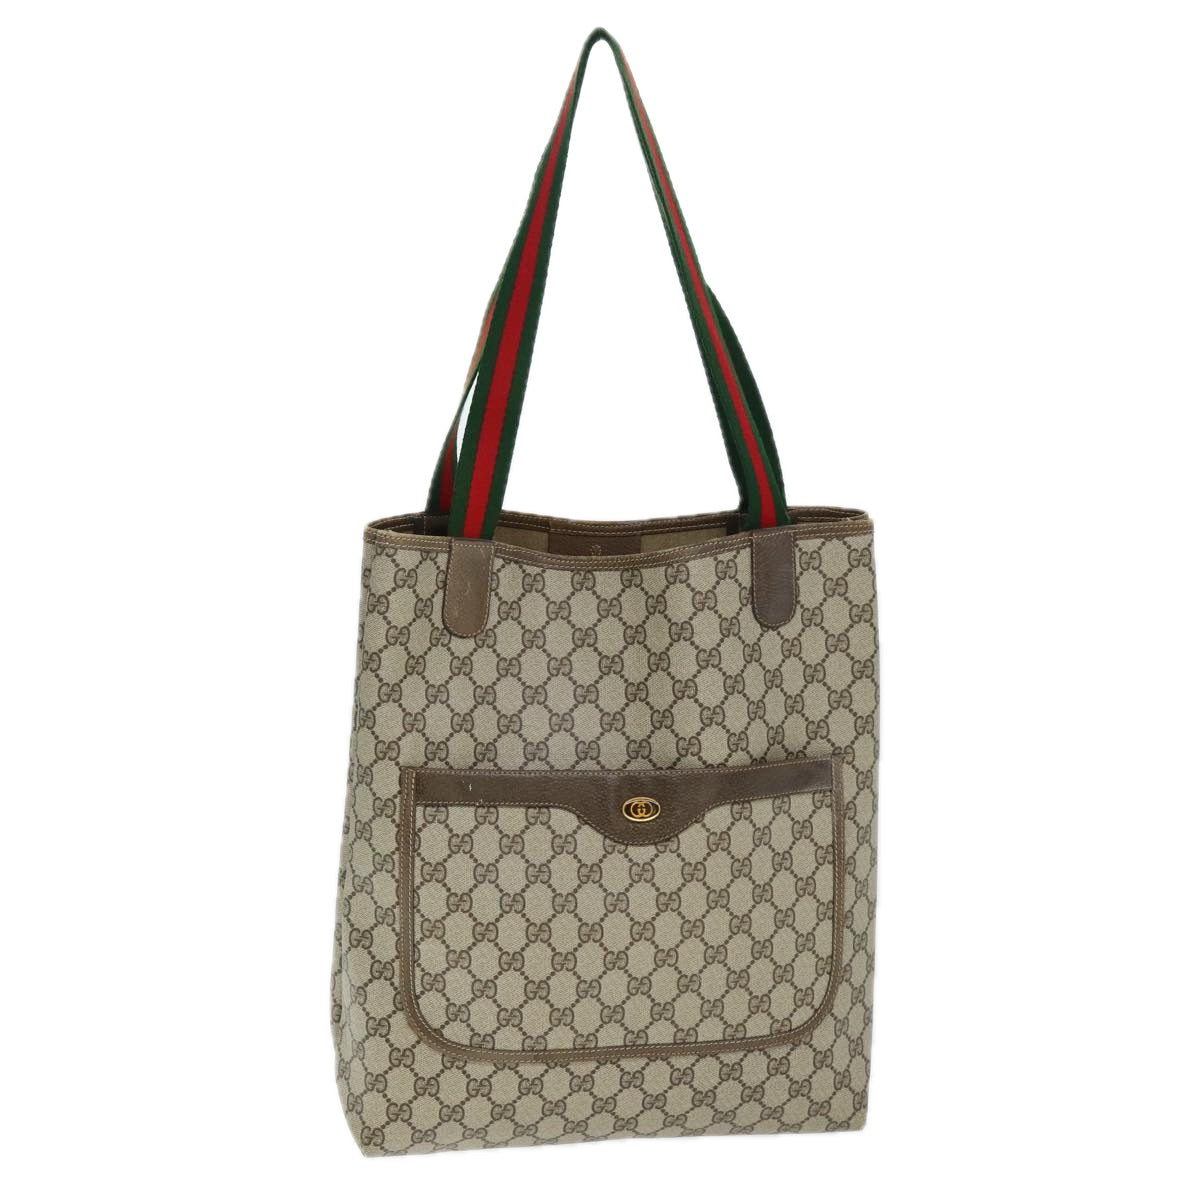 GUCCI GG Supreme Web Sherry Line Tote Bag PVC Beige Red 39 02 003 Auth 74551